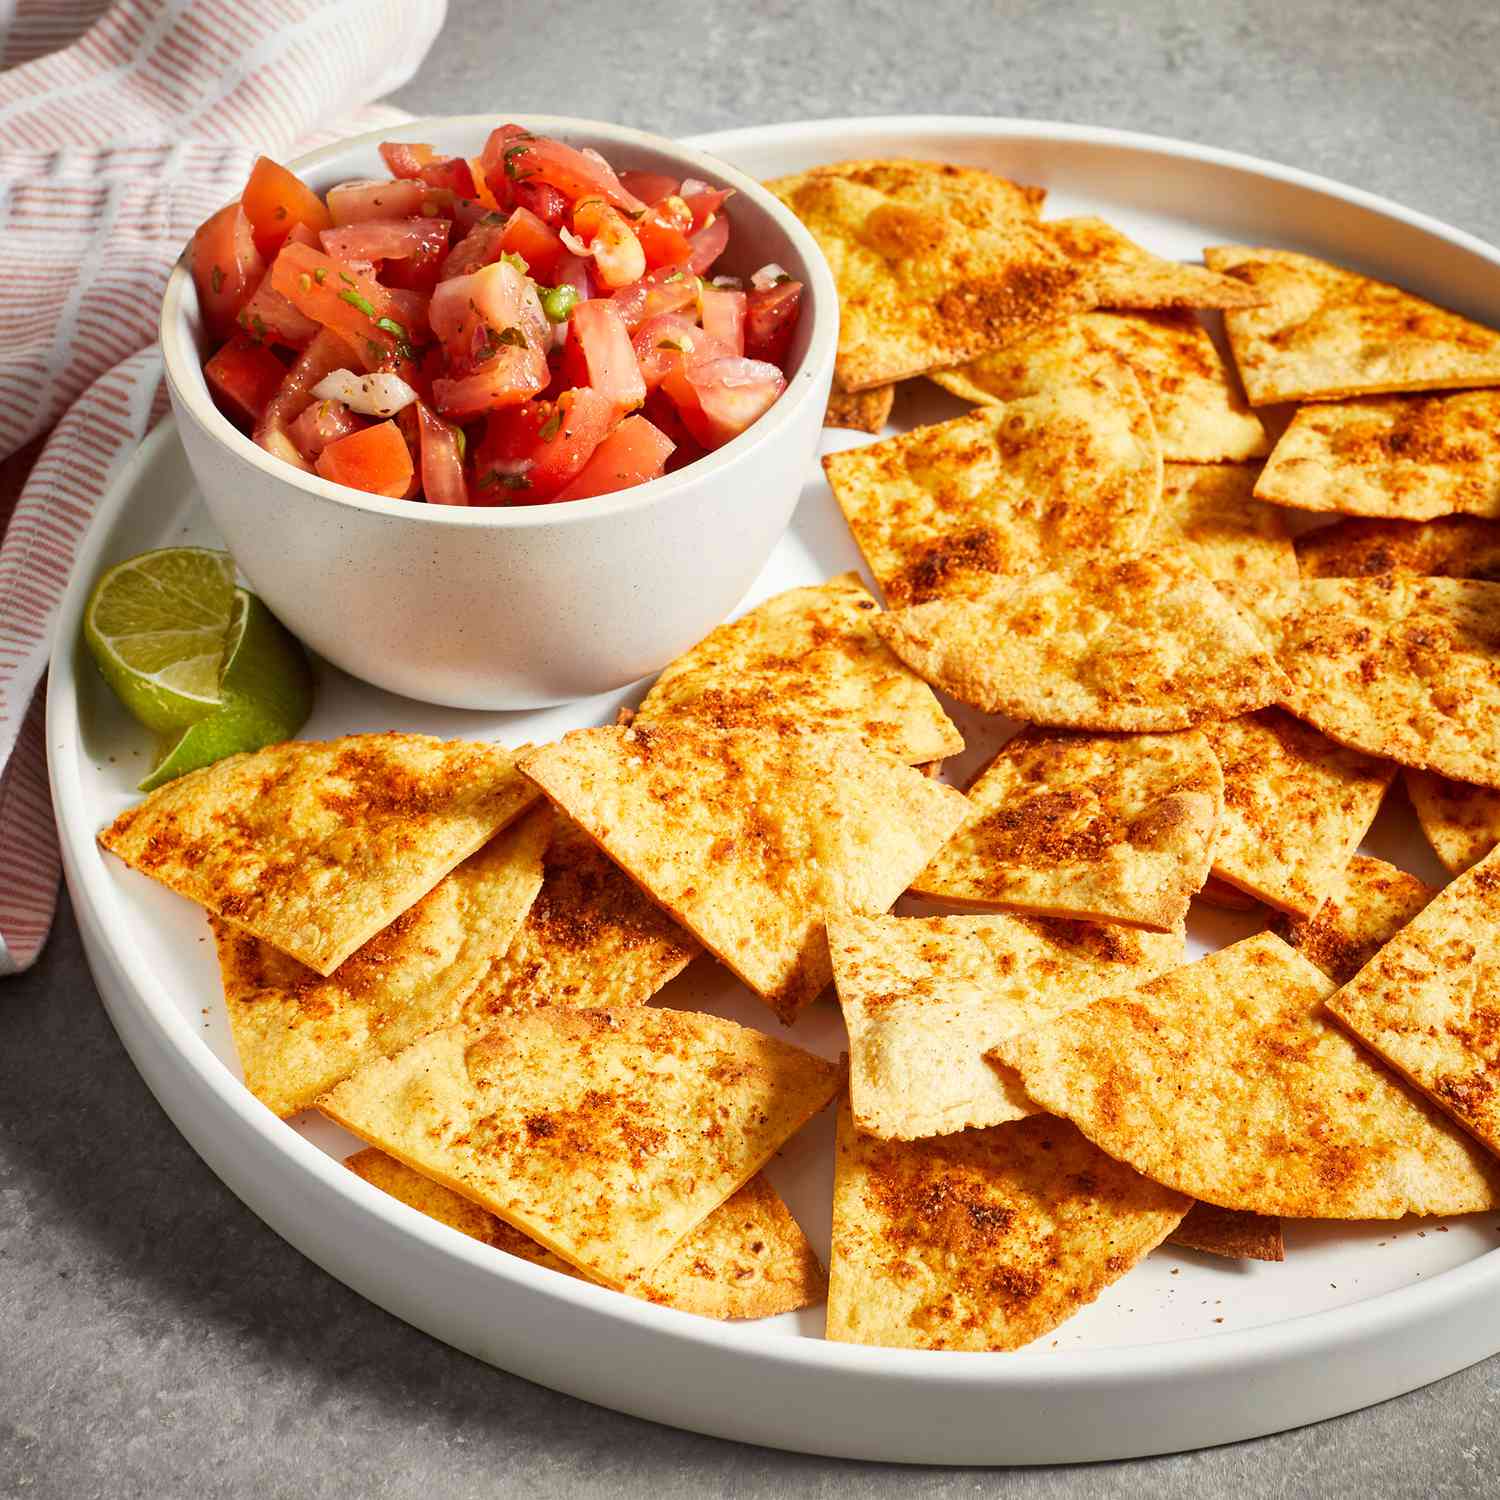 a low angle view of a platter of golden-brown baked tortilla chips served with a side of fresh salsa.